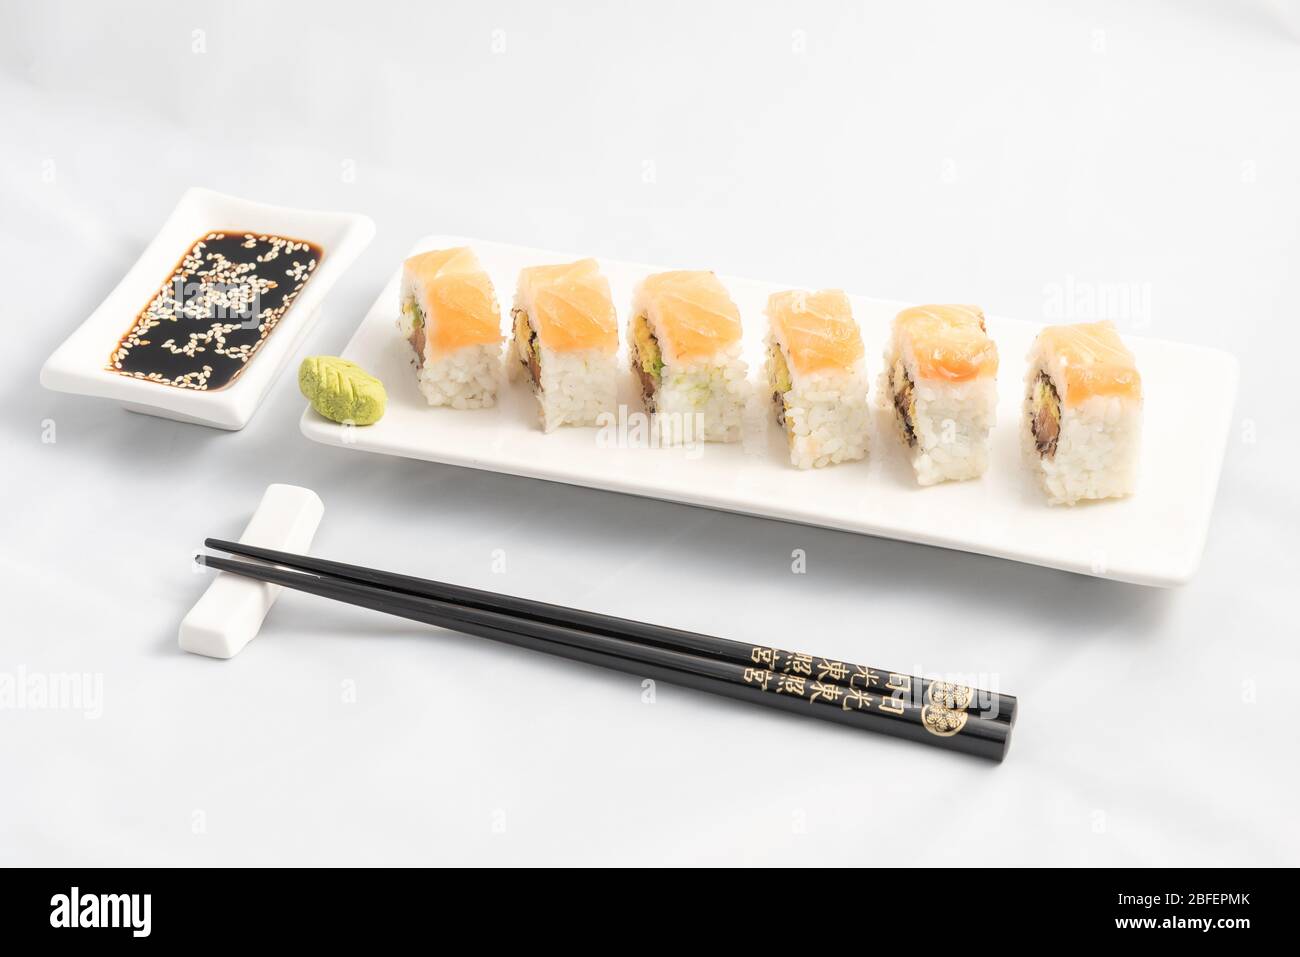 Sushi roll with pink salmon wrap, grilled salmon, Philadelphia cheese and avocado. White container and black chopsticks. Stock Photo